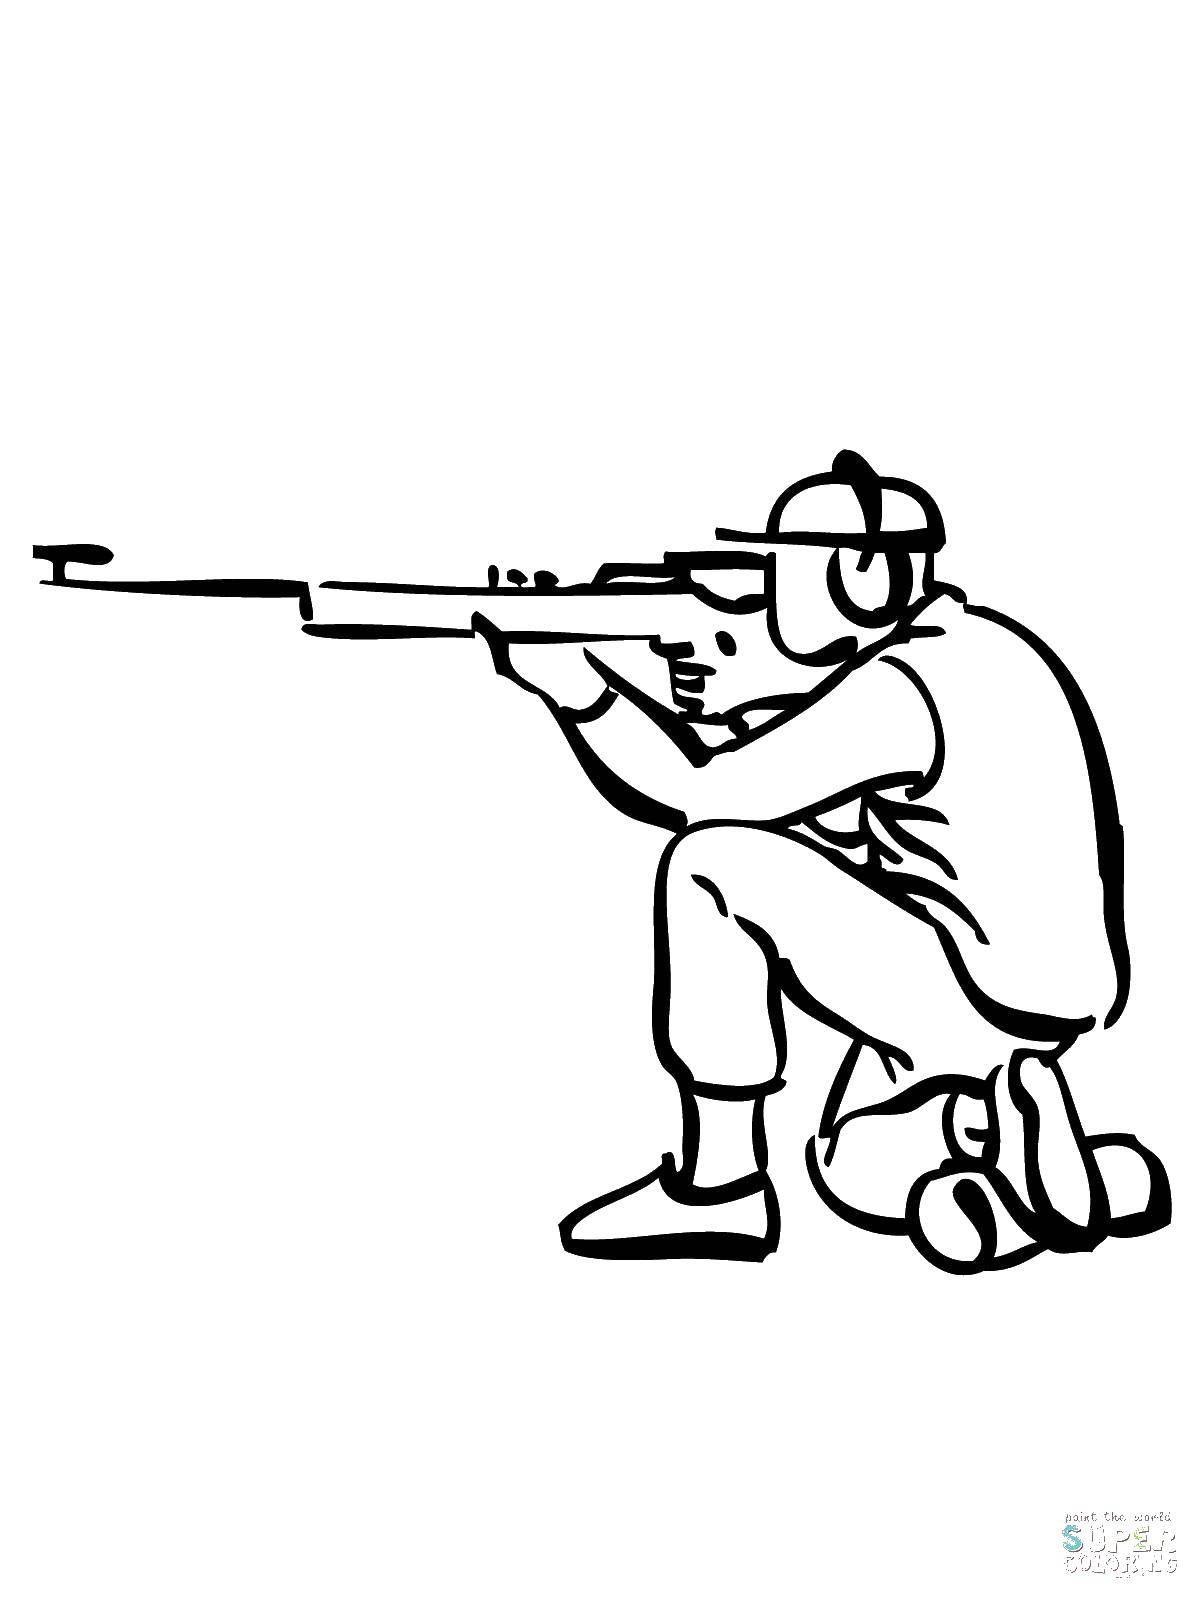 Coloring Sniper. Category military coloring pages. Tags:  sniper, rifle.